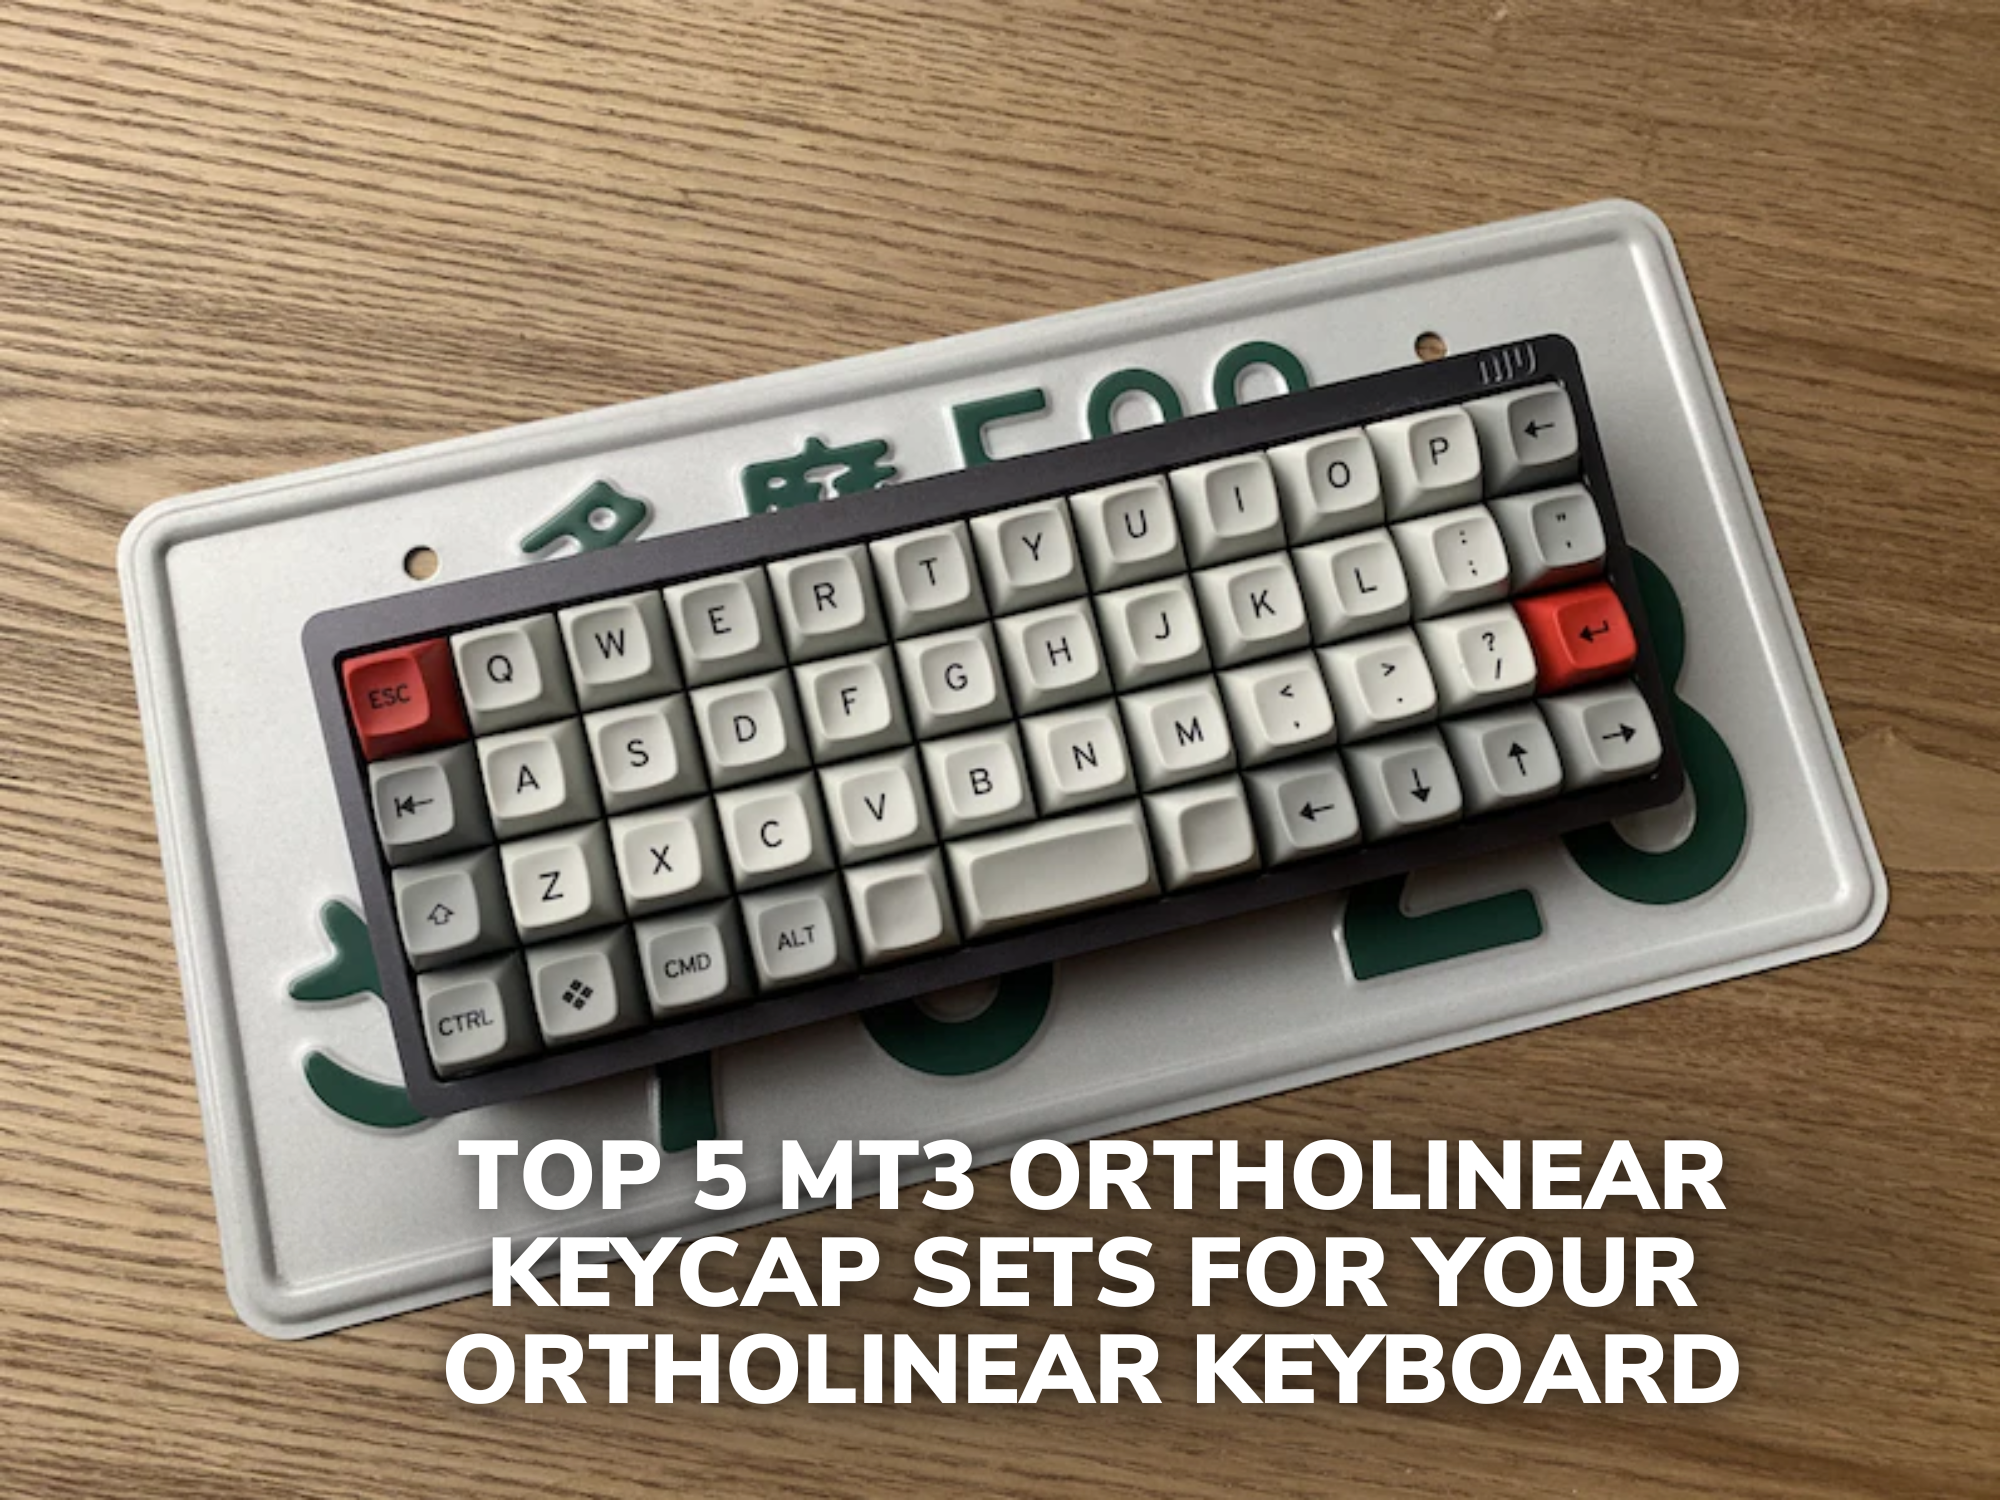 Top 5 MT3 Ortholinear Keycap Sets for Your Ortholinear Keyboard